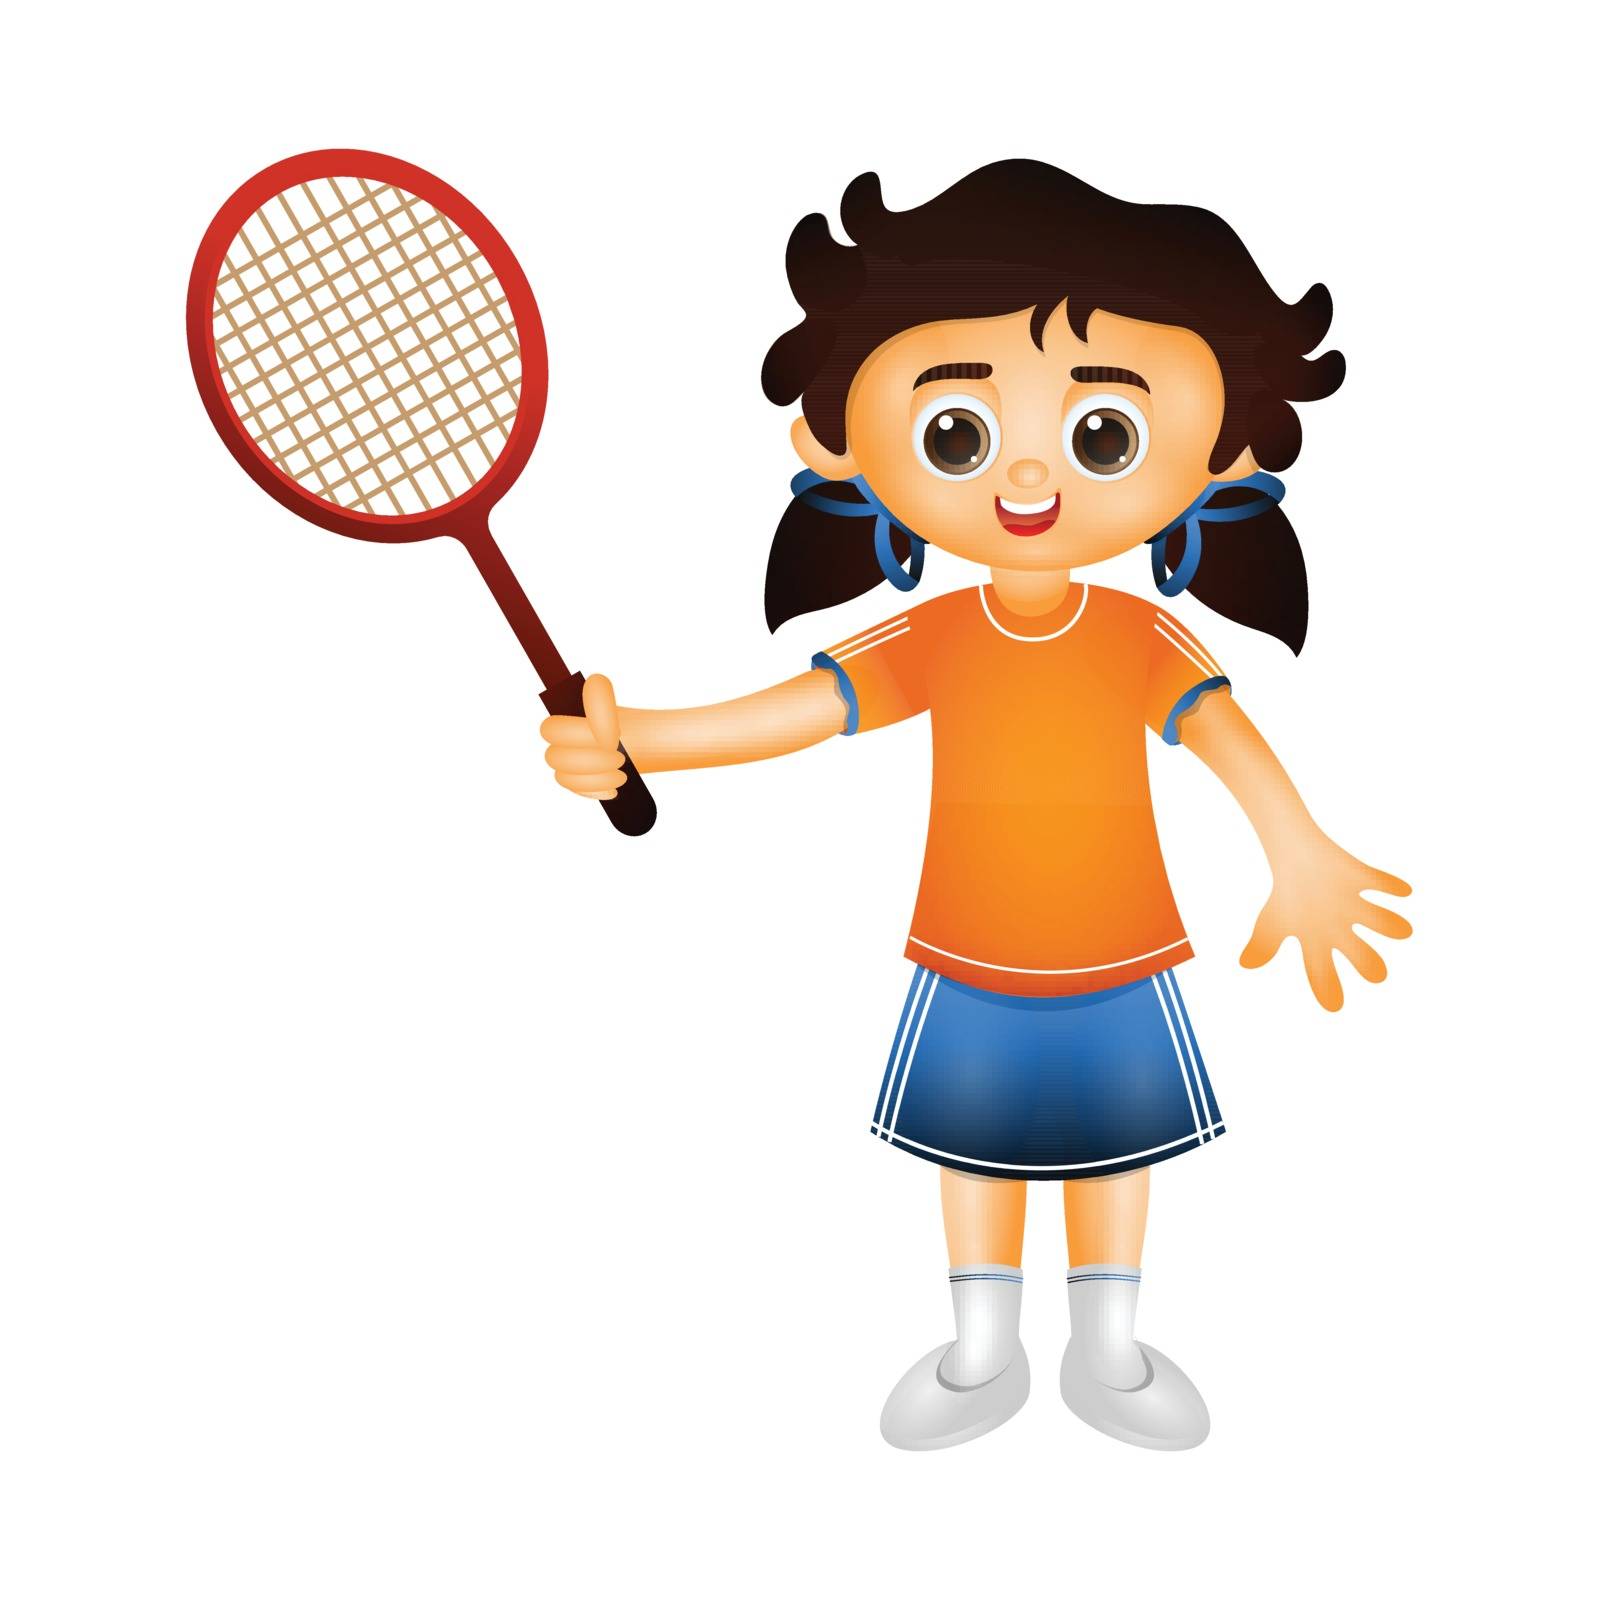 Little girl cartoon character playing badminton. Stock Image | VectorGrove  - Royalty Free Vector Images with commercial license